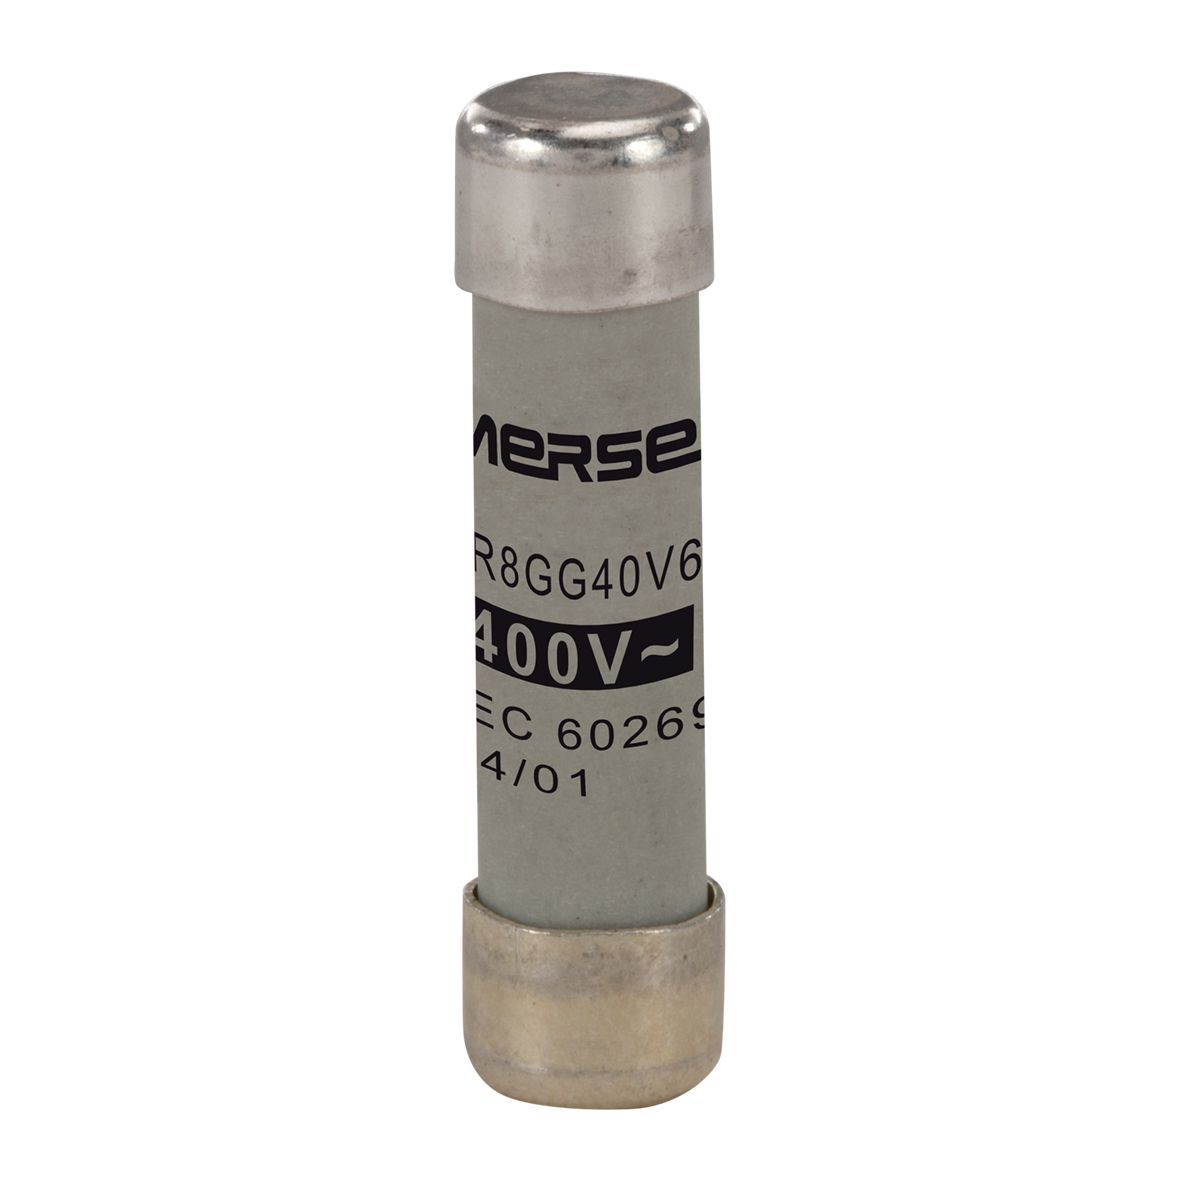 A211025 - Cylindrical fuse-link gG 400VAC 8.5x31.5, 6A